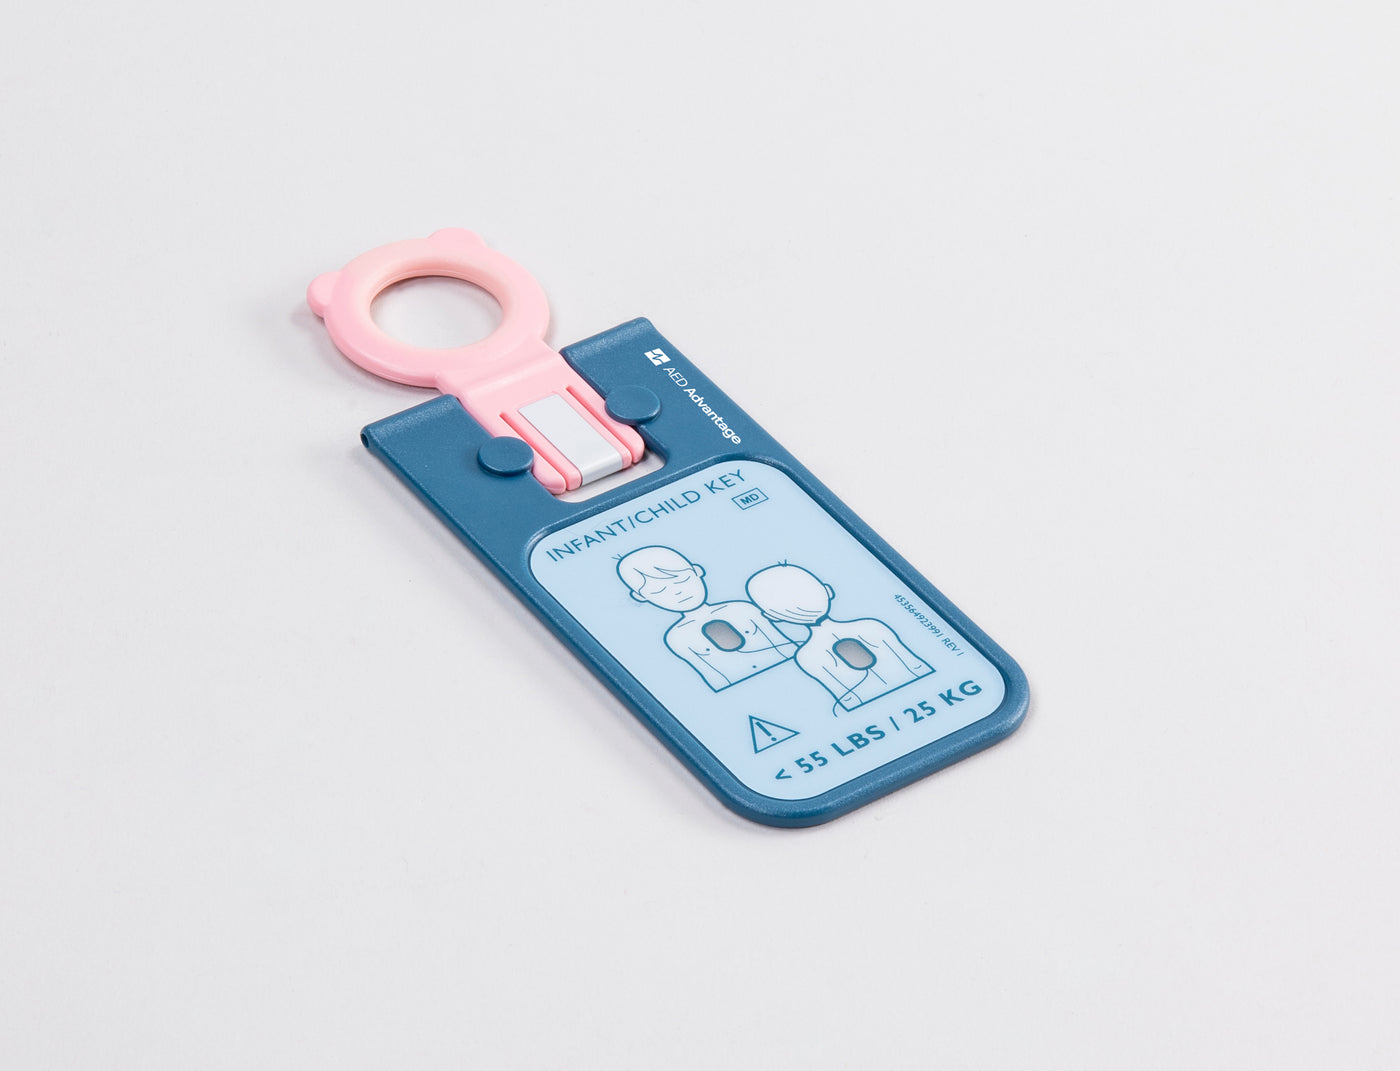 A blue and pink rectangular key for the Philips HeartStart FRx AED